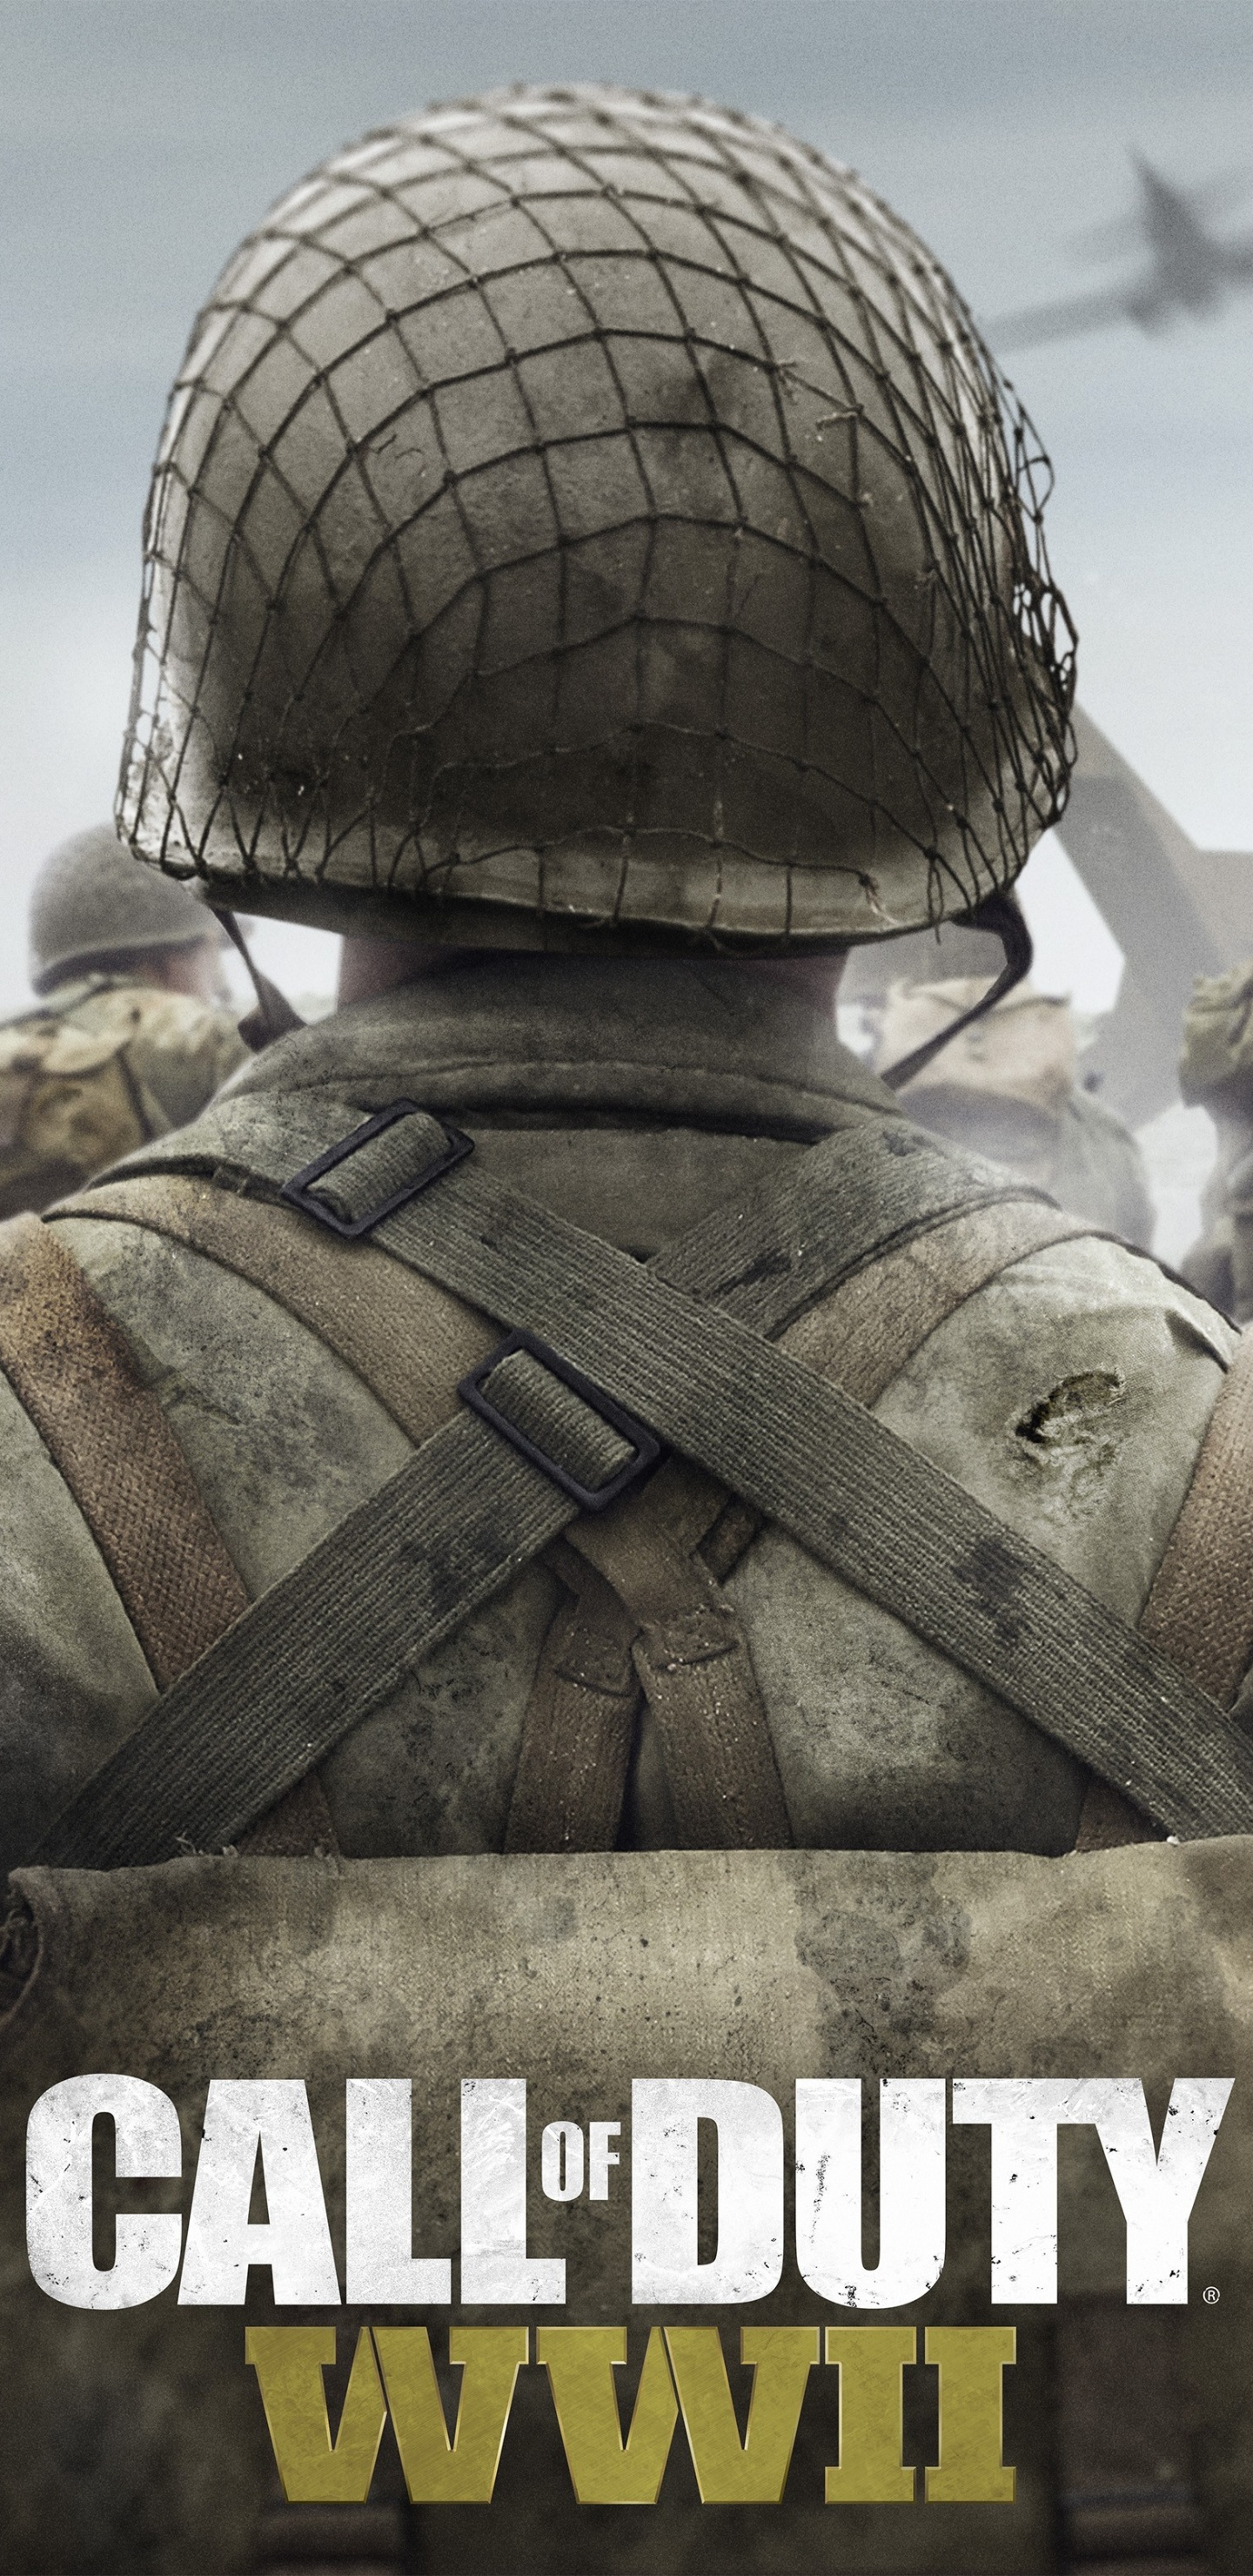 Call of Duty Ww2, Call of Duty WWII, Activision, Sledgehammer Games, Soldier. Wallpaper in 1440x2960 Resolution